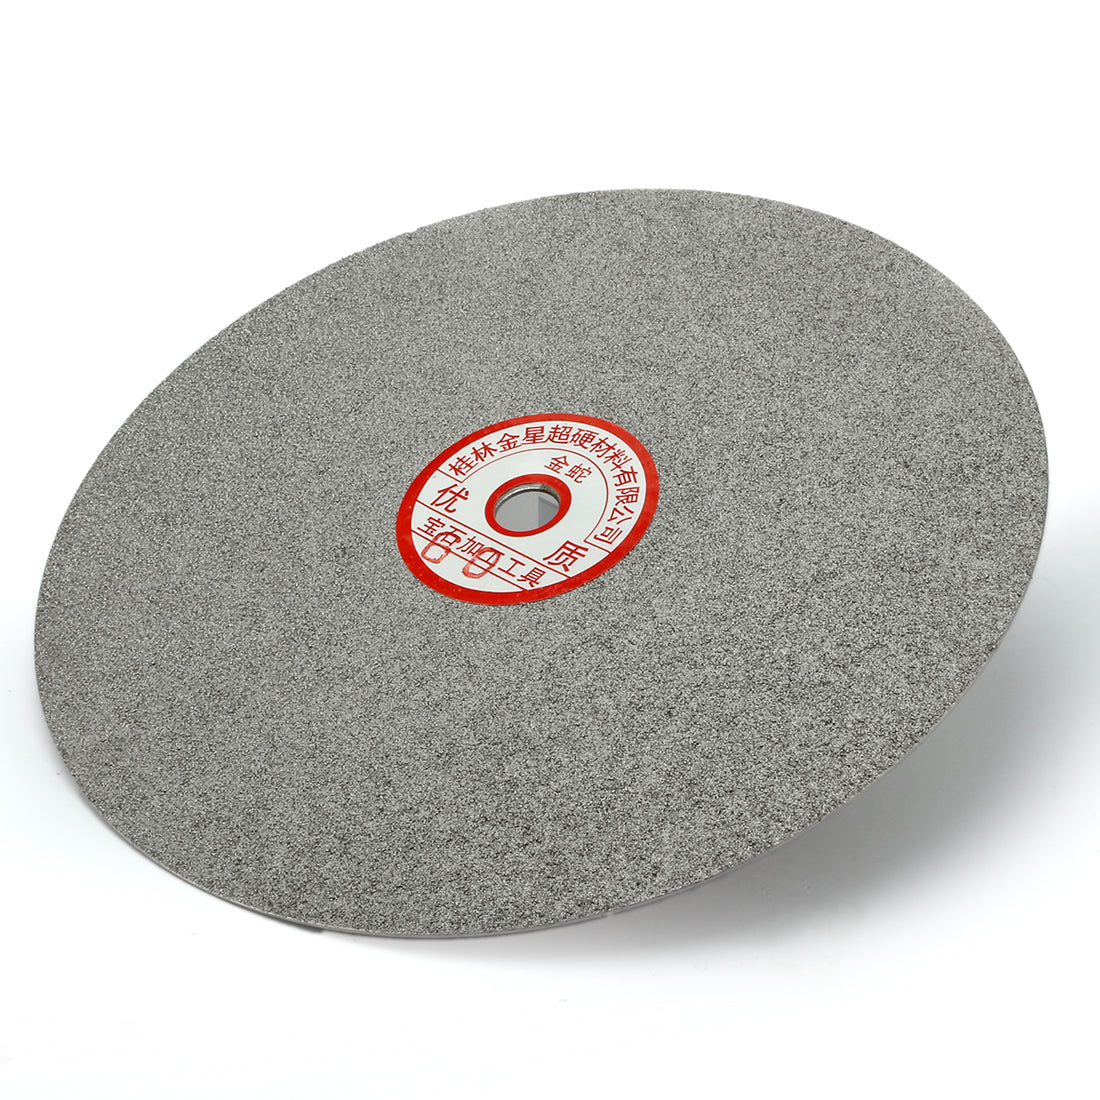 uxcell Uxcell 12-inch Diamond Coated Flat Lap Disk Wheel Grinding Sanding Disc